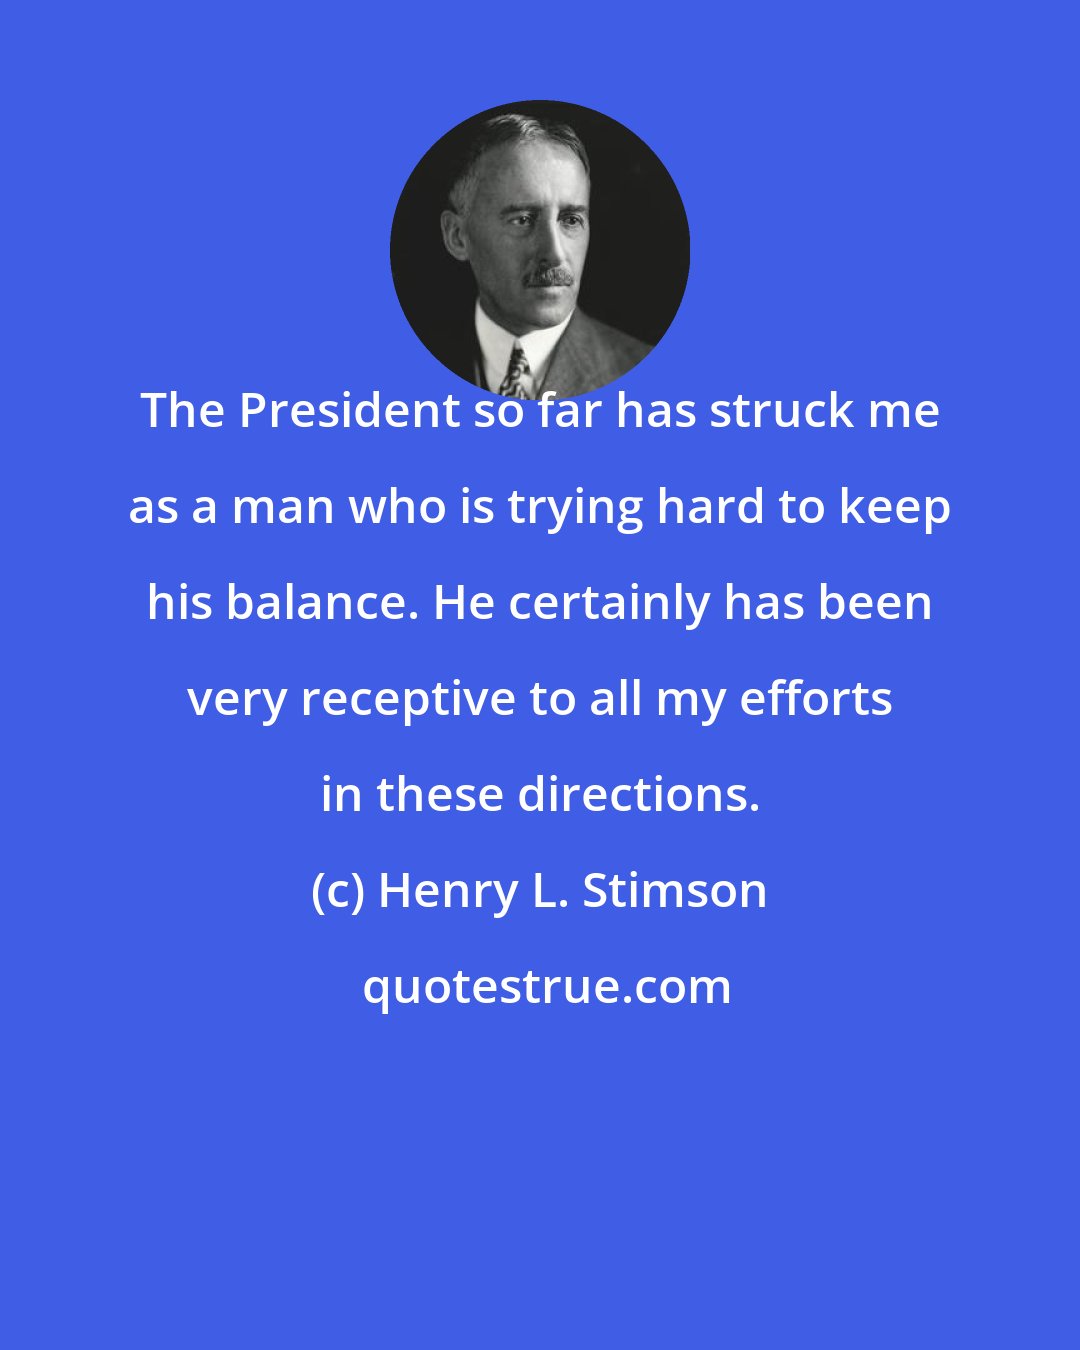 Henry L. Stimson: The President so far has struck me as a man who is trying hard to keep his balance. He certainly has been very receptive to all my efforts in these directions.